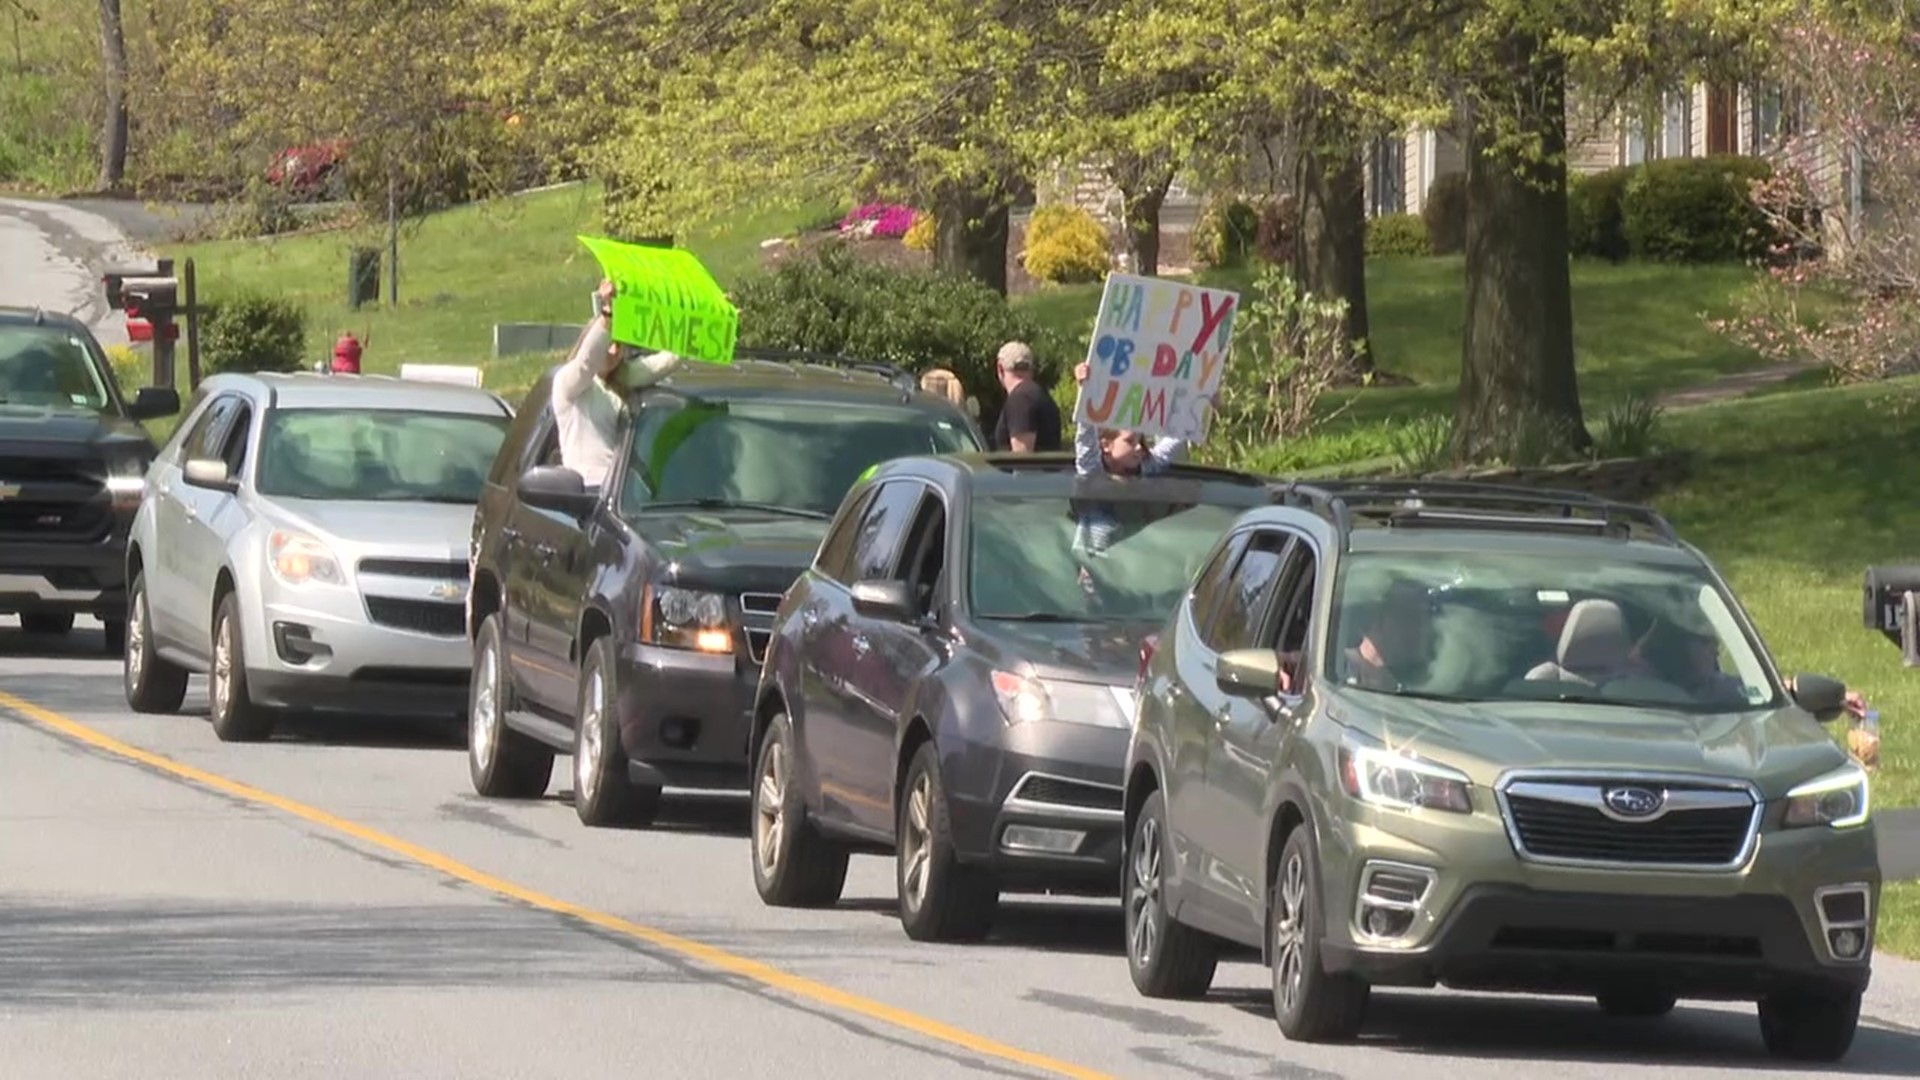 A birthday parade was held for a young boy who had lost his mother days ago in a car accident.